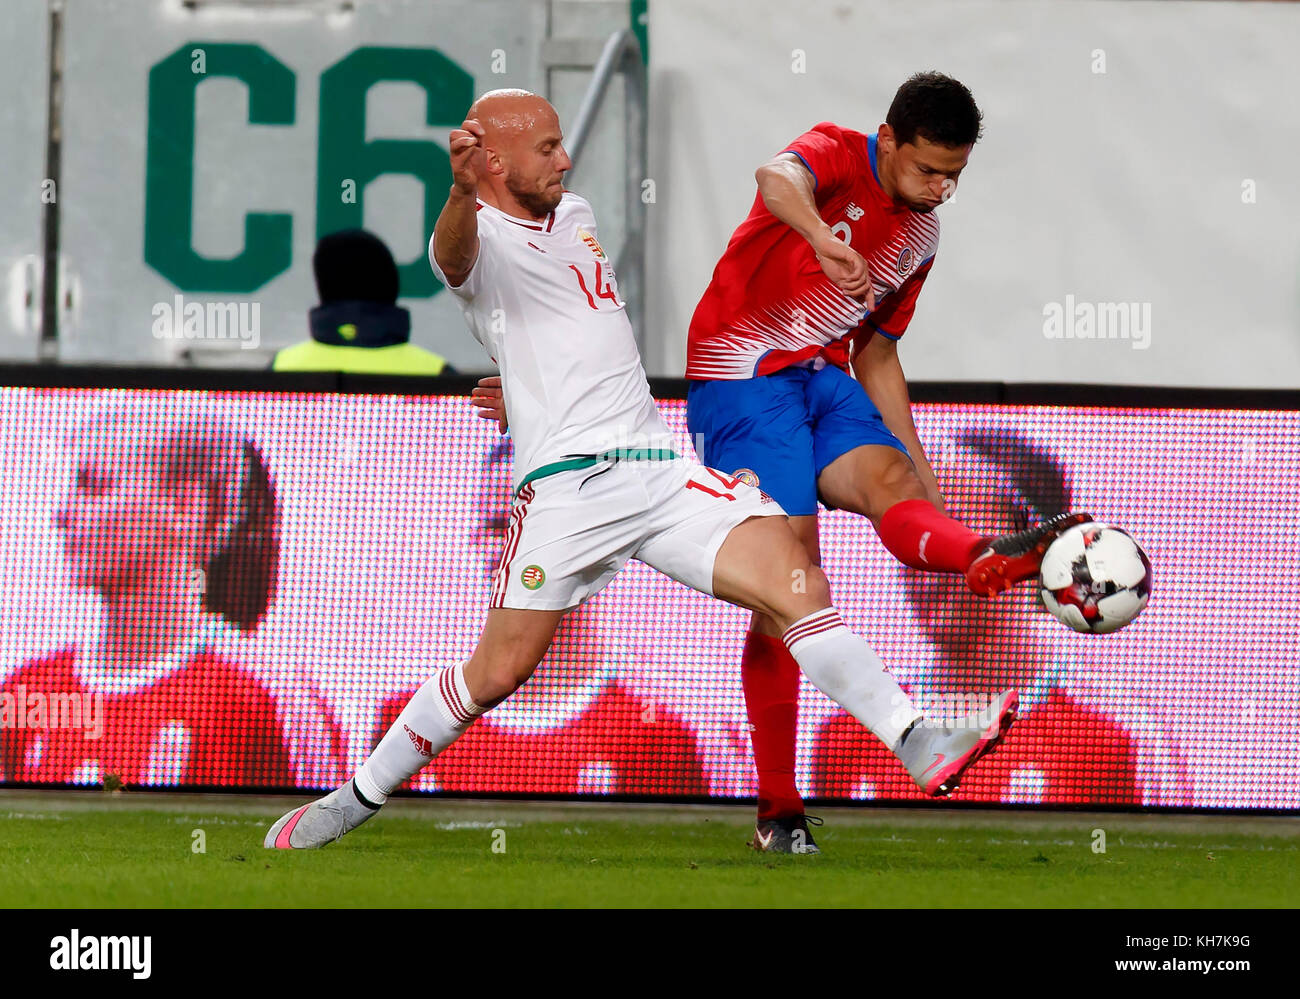 Budapest, Hungary. 14th Nov, 2017. Daniel Colindres (R) of Costa Rica crosses the ball next to Jozsef Varga #14 of Hungary during the at Groupama Arena on November 14, 2017 in Budapest, Hungary. Credit: Laszlo Szirtesi/Alamy Live News Stock Photo